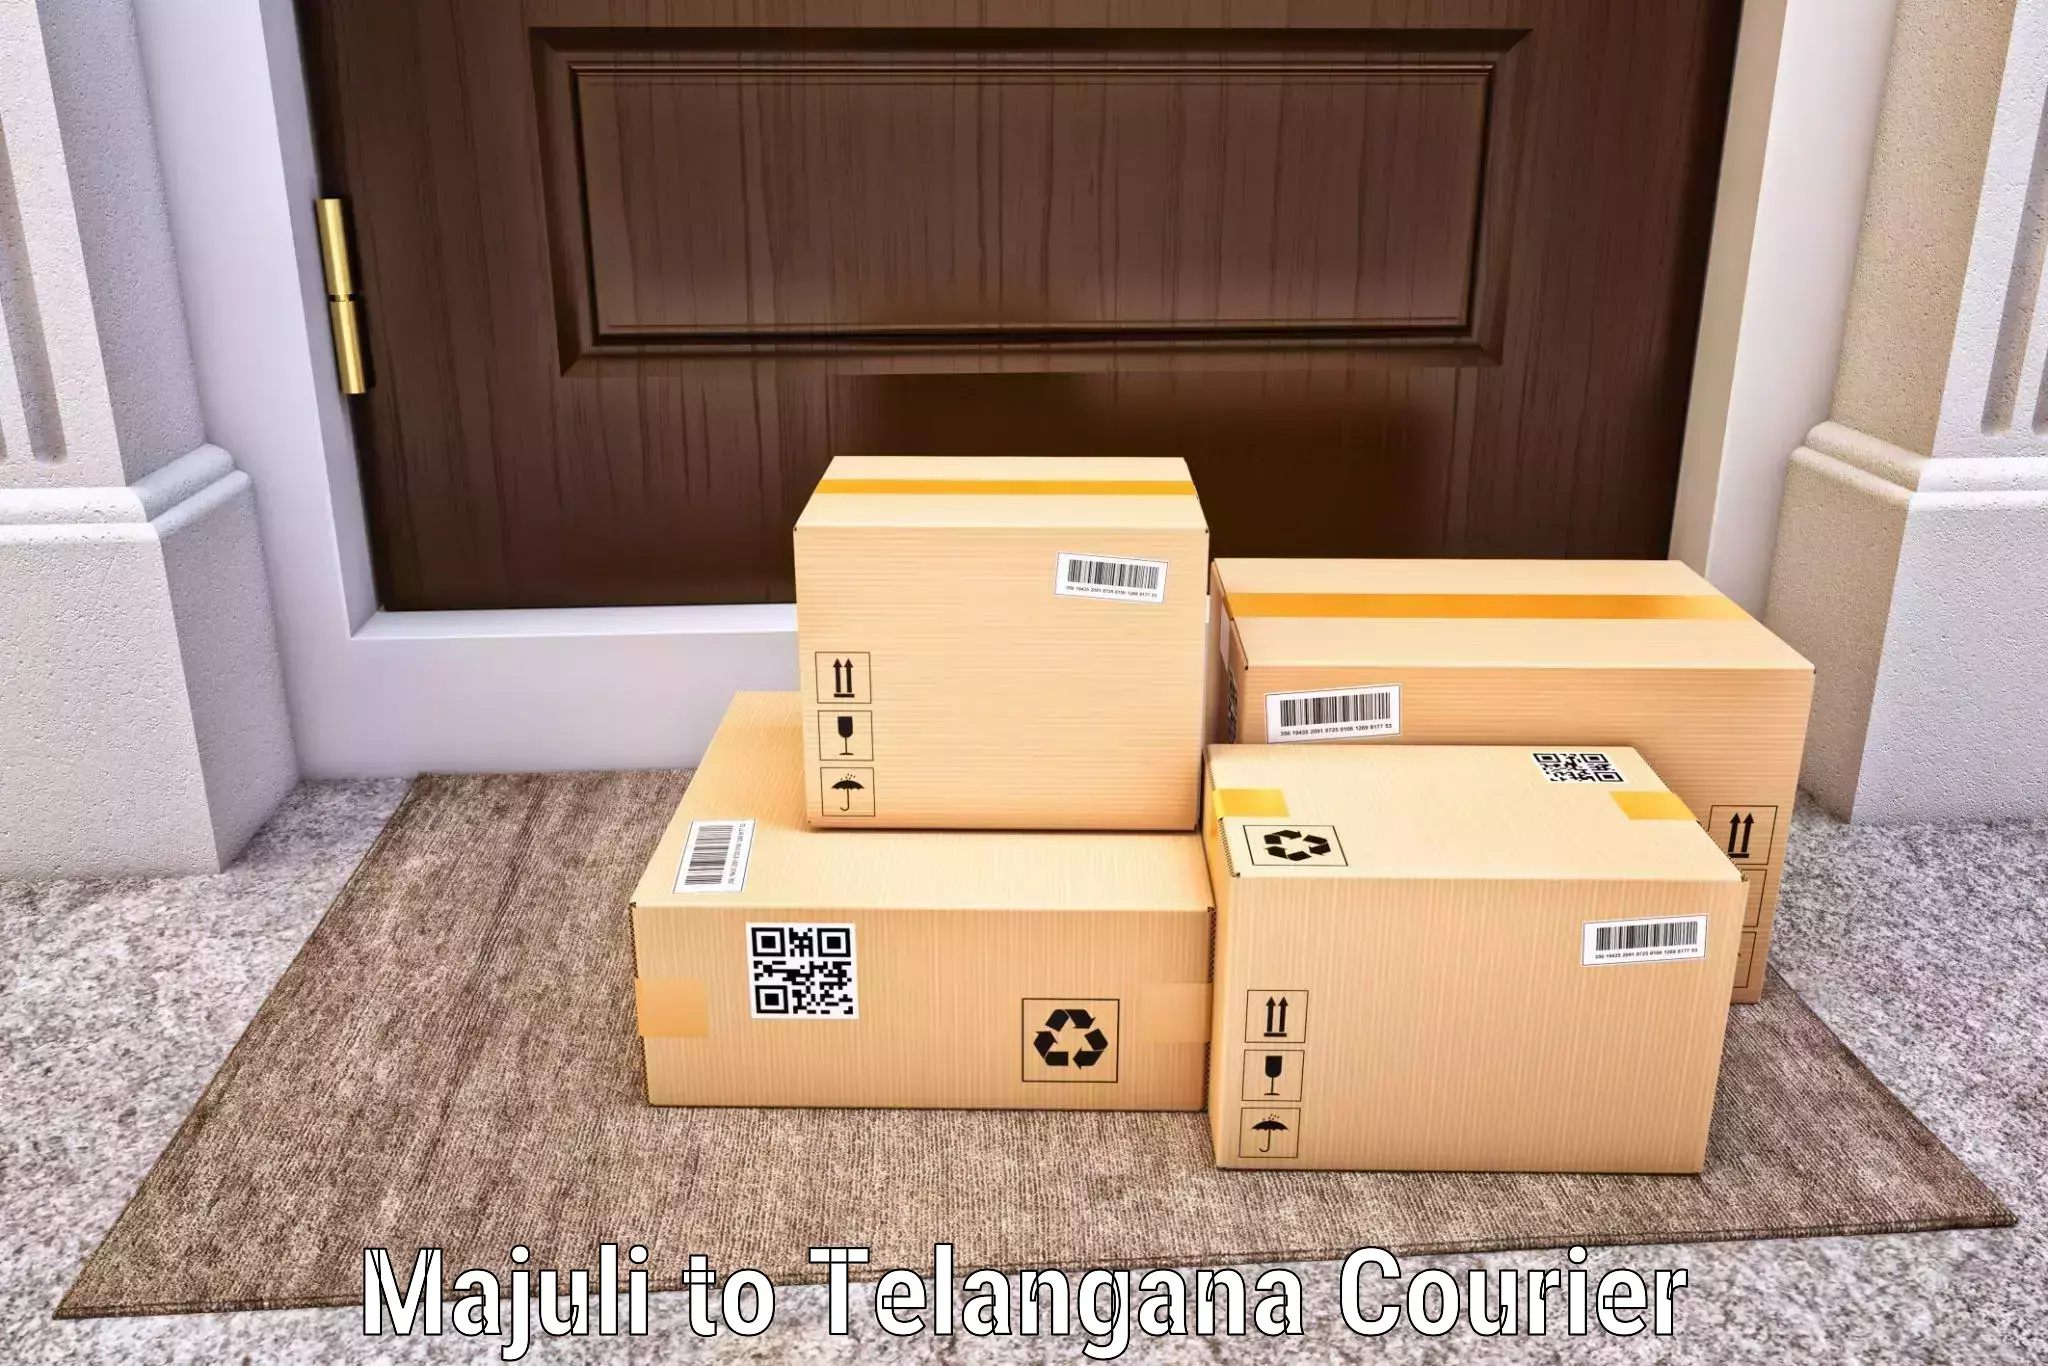 Full-service courier options Majuli to Secunderabad